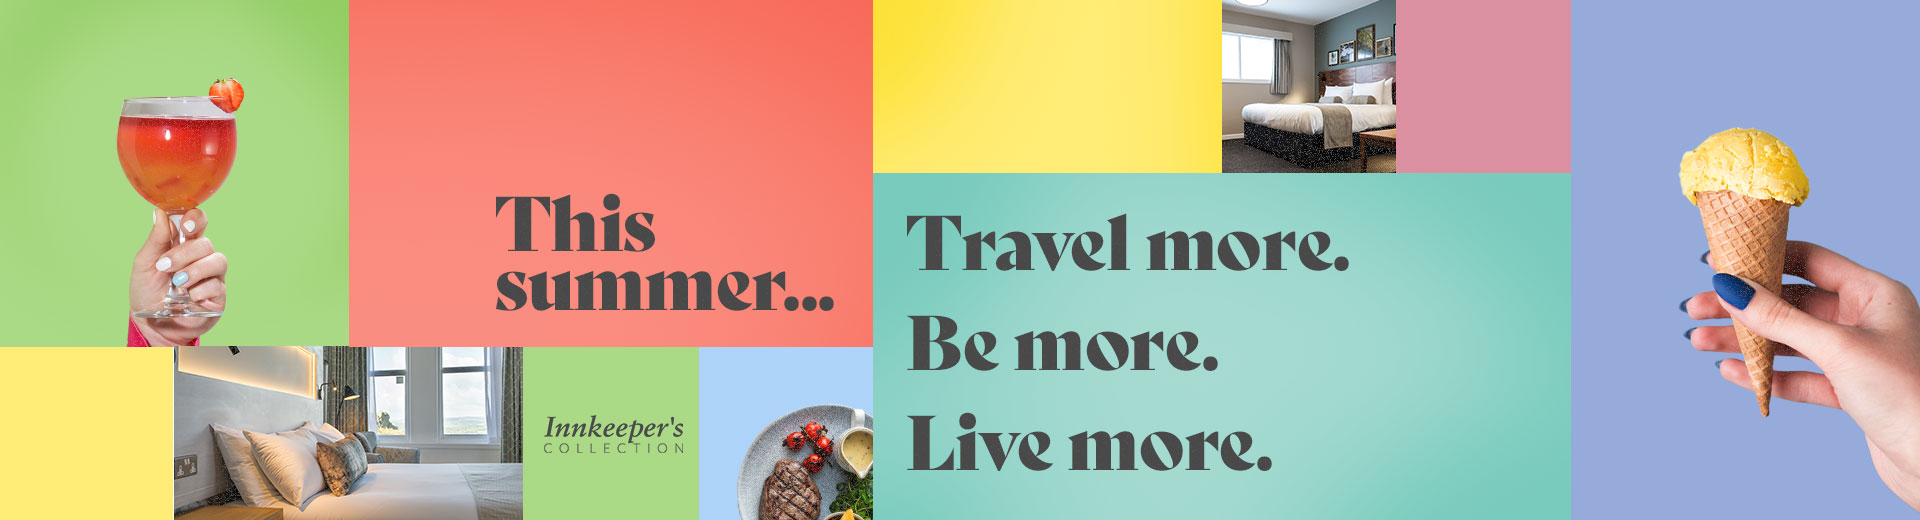 “This summer... Travel more. Be more. Live more.” is written on a multi-coloured background, showing hotel bedrooms, a cocktail, and an ice-cream.